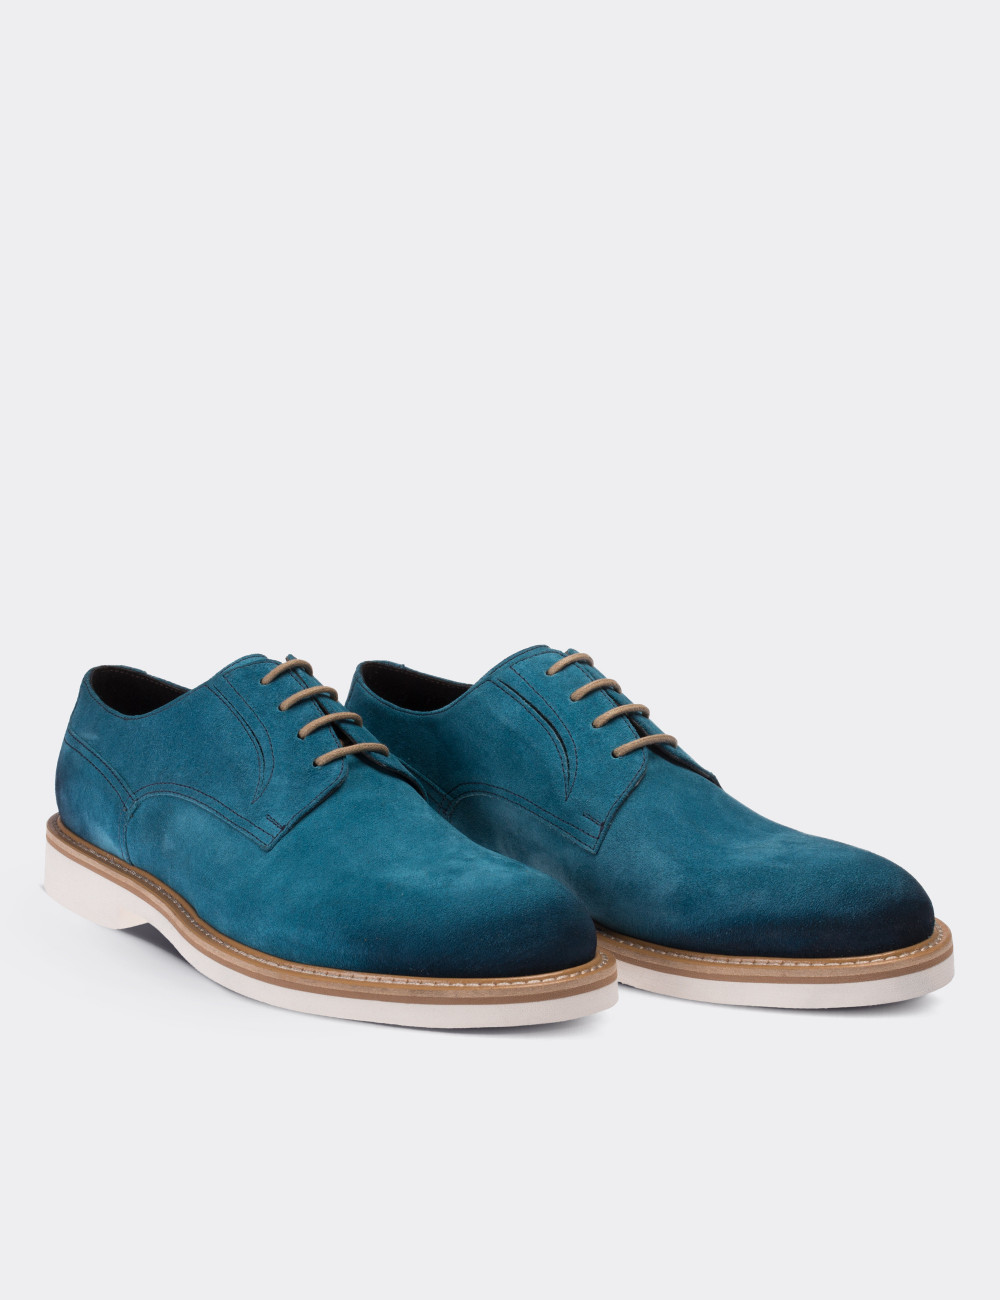 Blue Suede Leather Lace-up Shoes - 01294MMVIE01